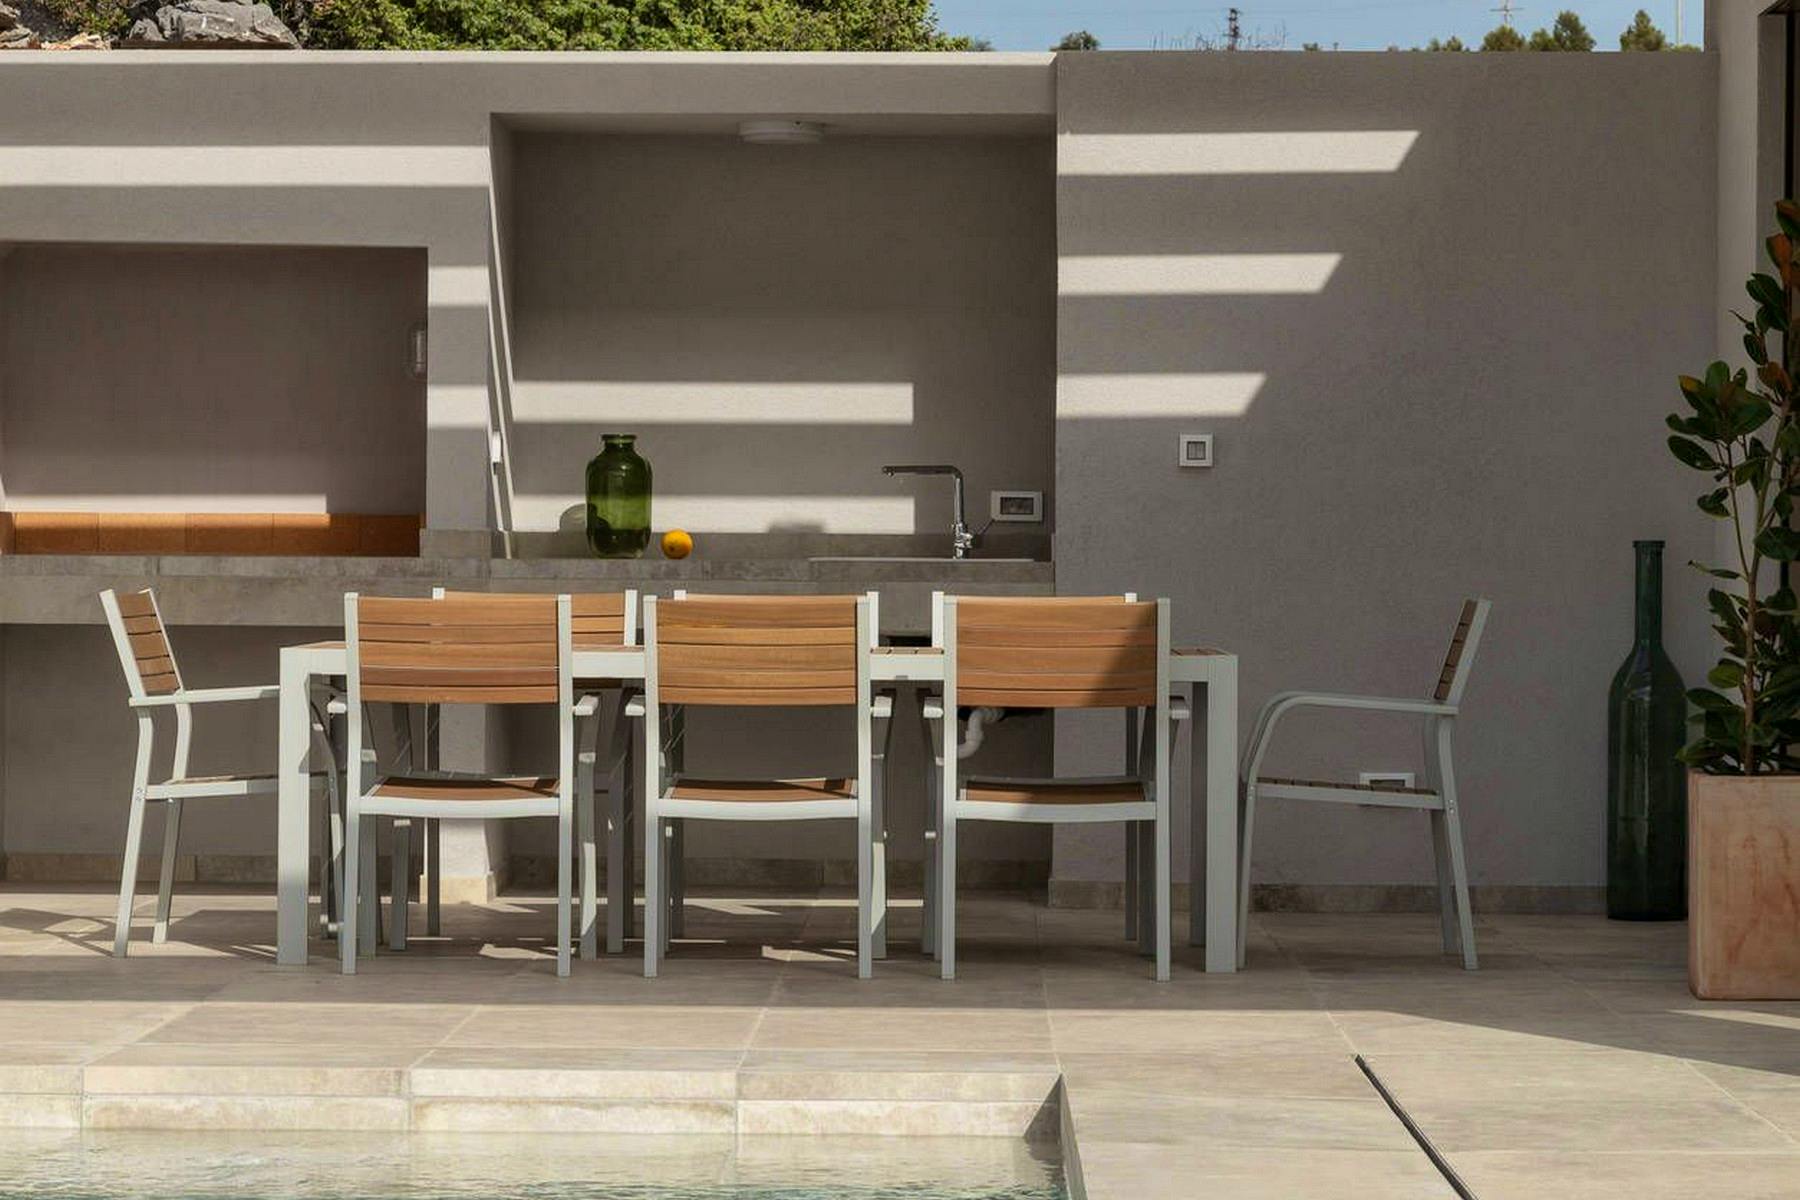 Summer kitchen, barbecue, and outside dining area